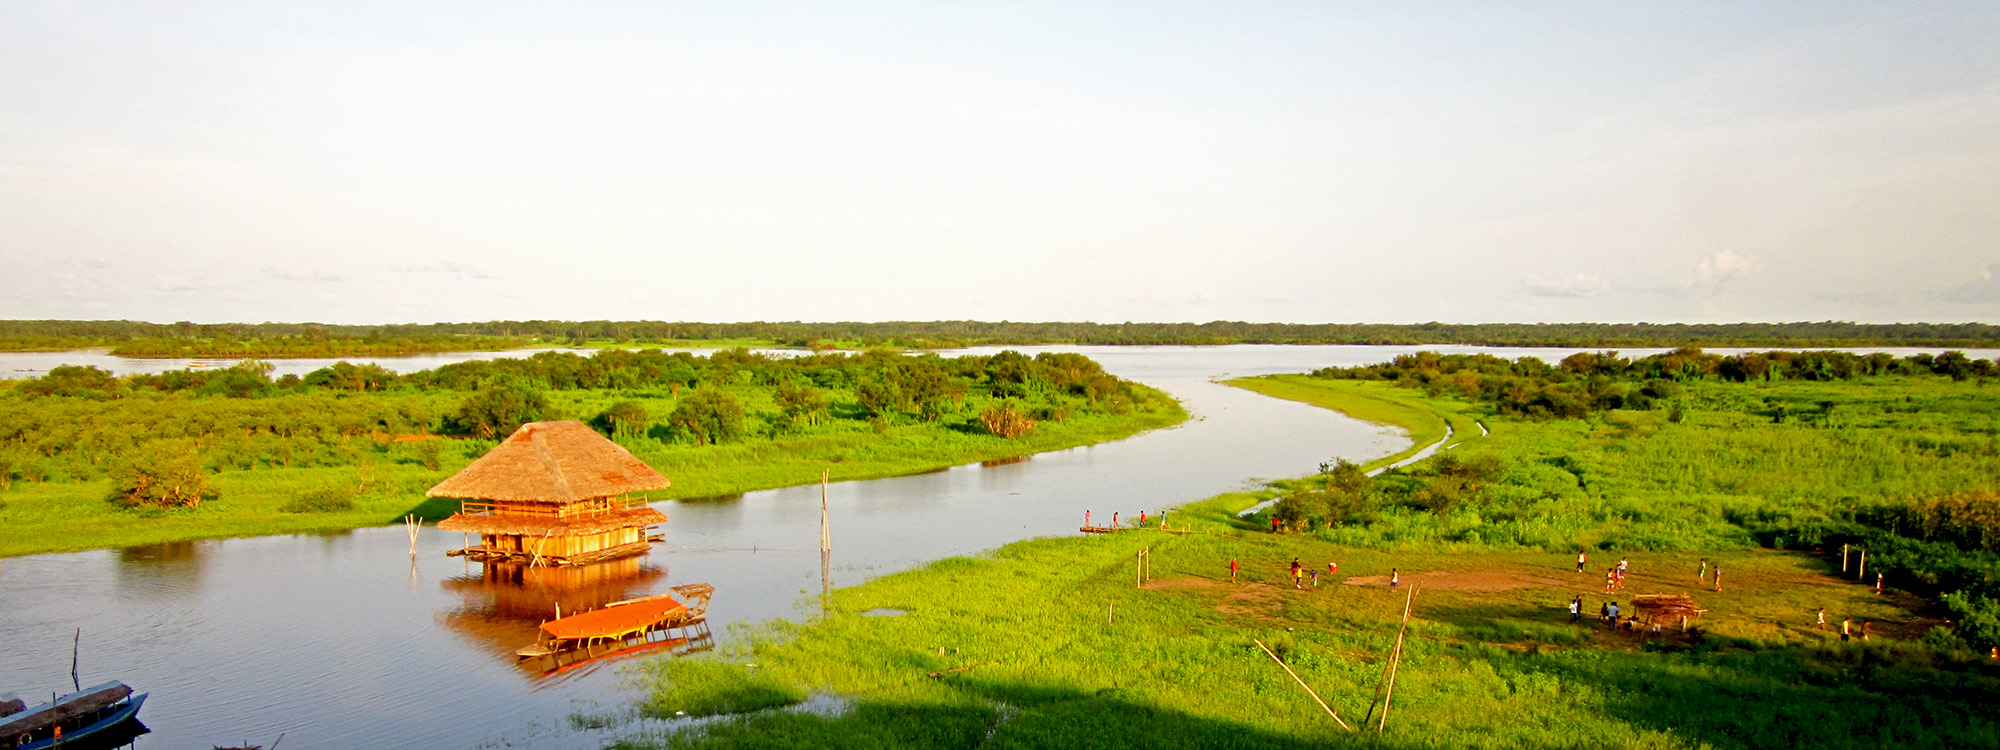 things to see and do in iquitos